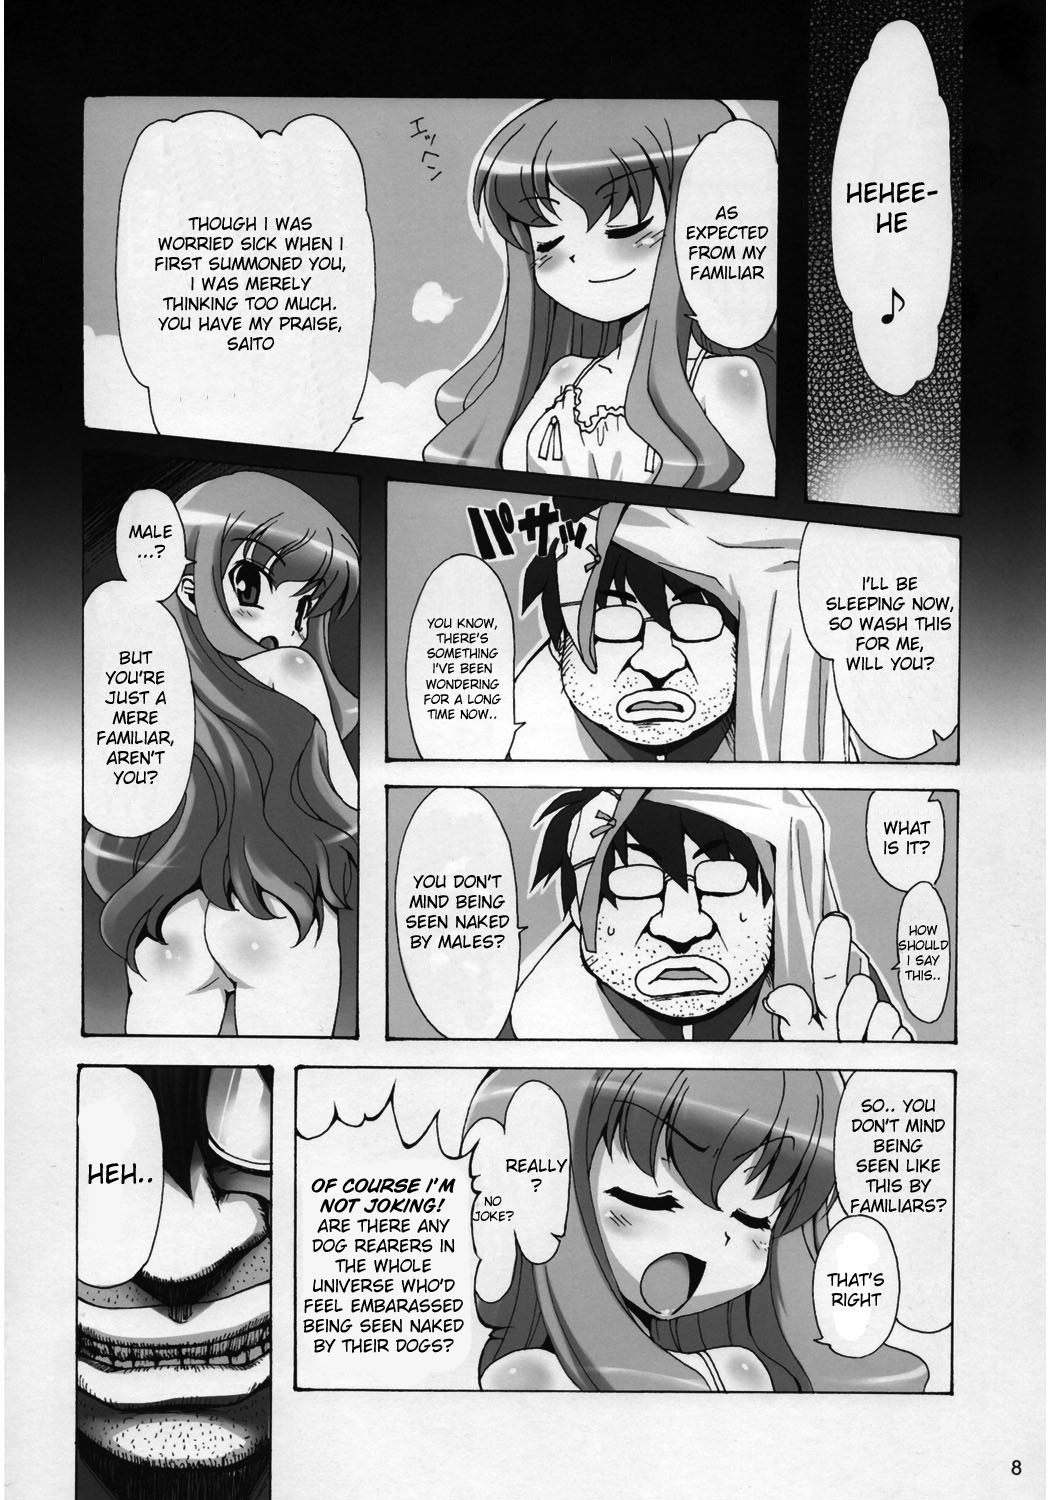 I Will Have Sex With Louise hentai manga picture 7